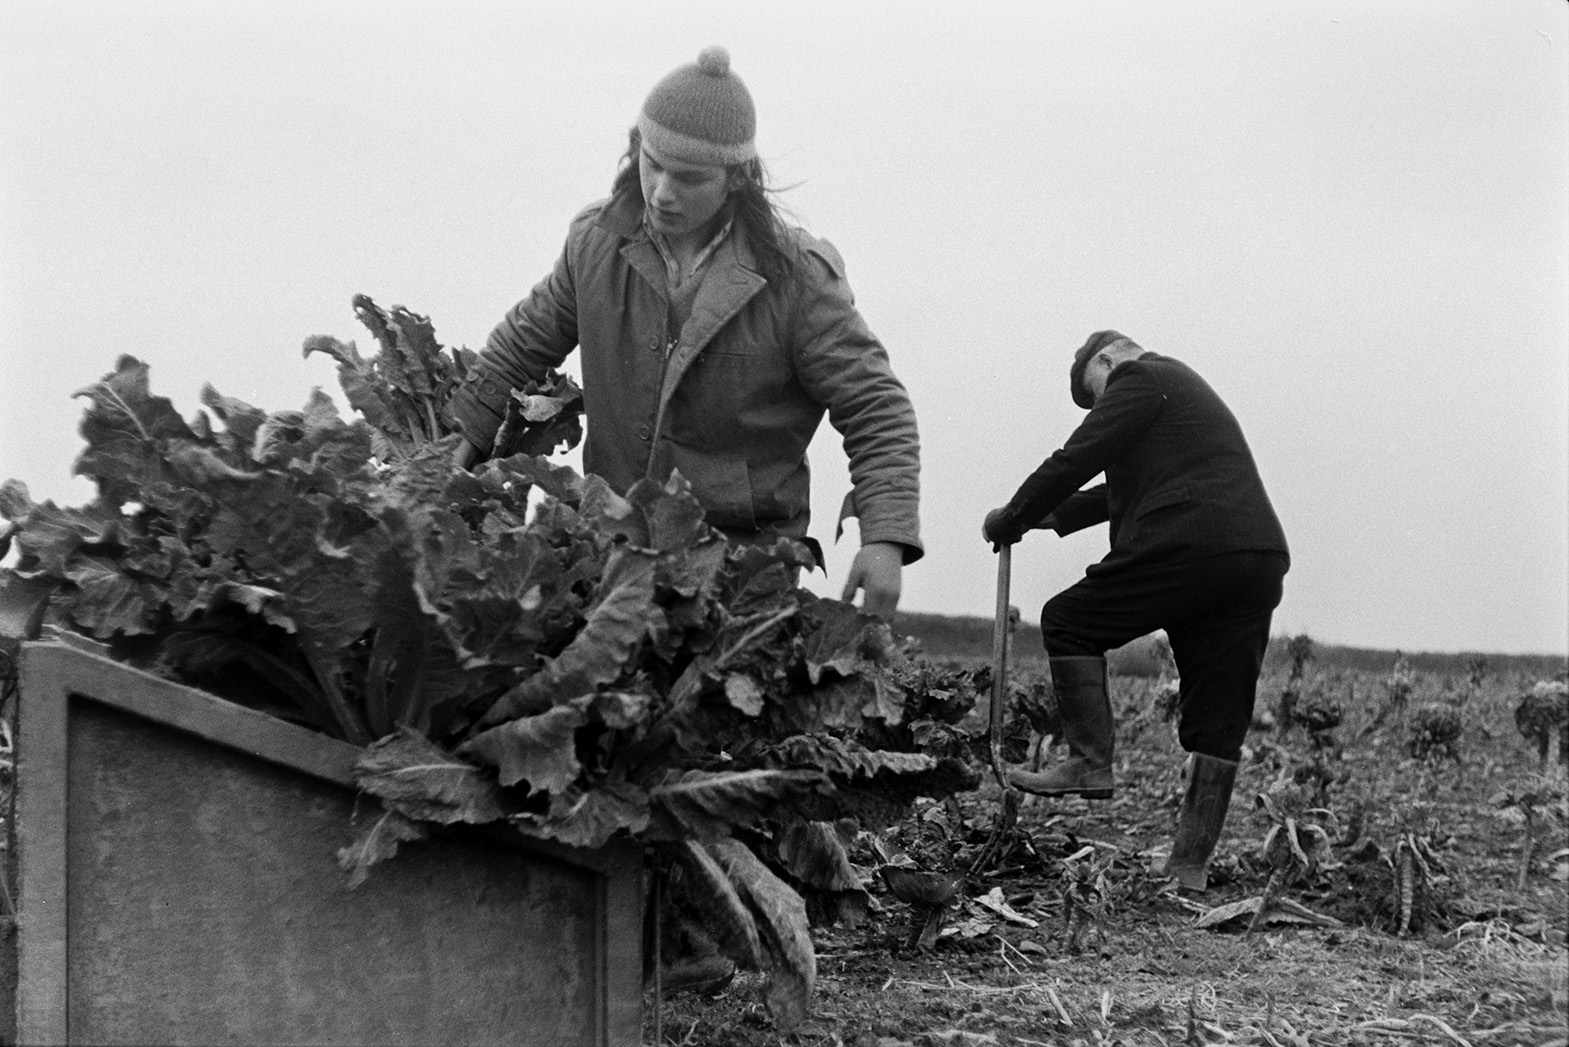 Derek Bright and a man lifting cauliflowers by hand with forks and loading them into a link box, in a field at Mill Road Farm, Beaford. The farm was also known as Jeffrys.